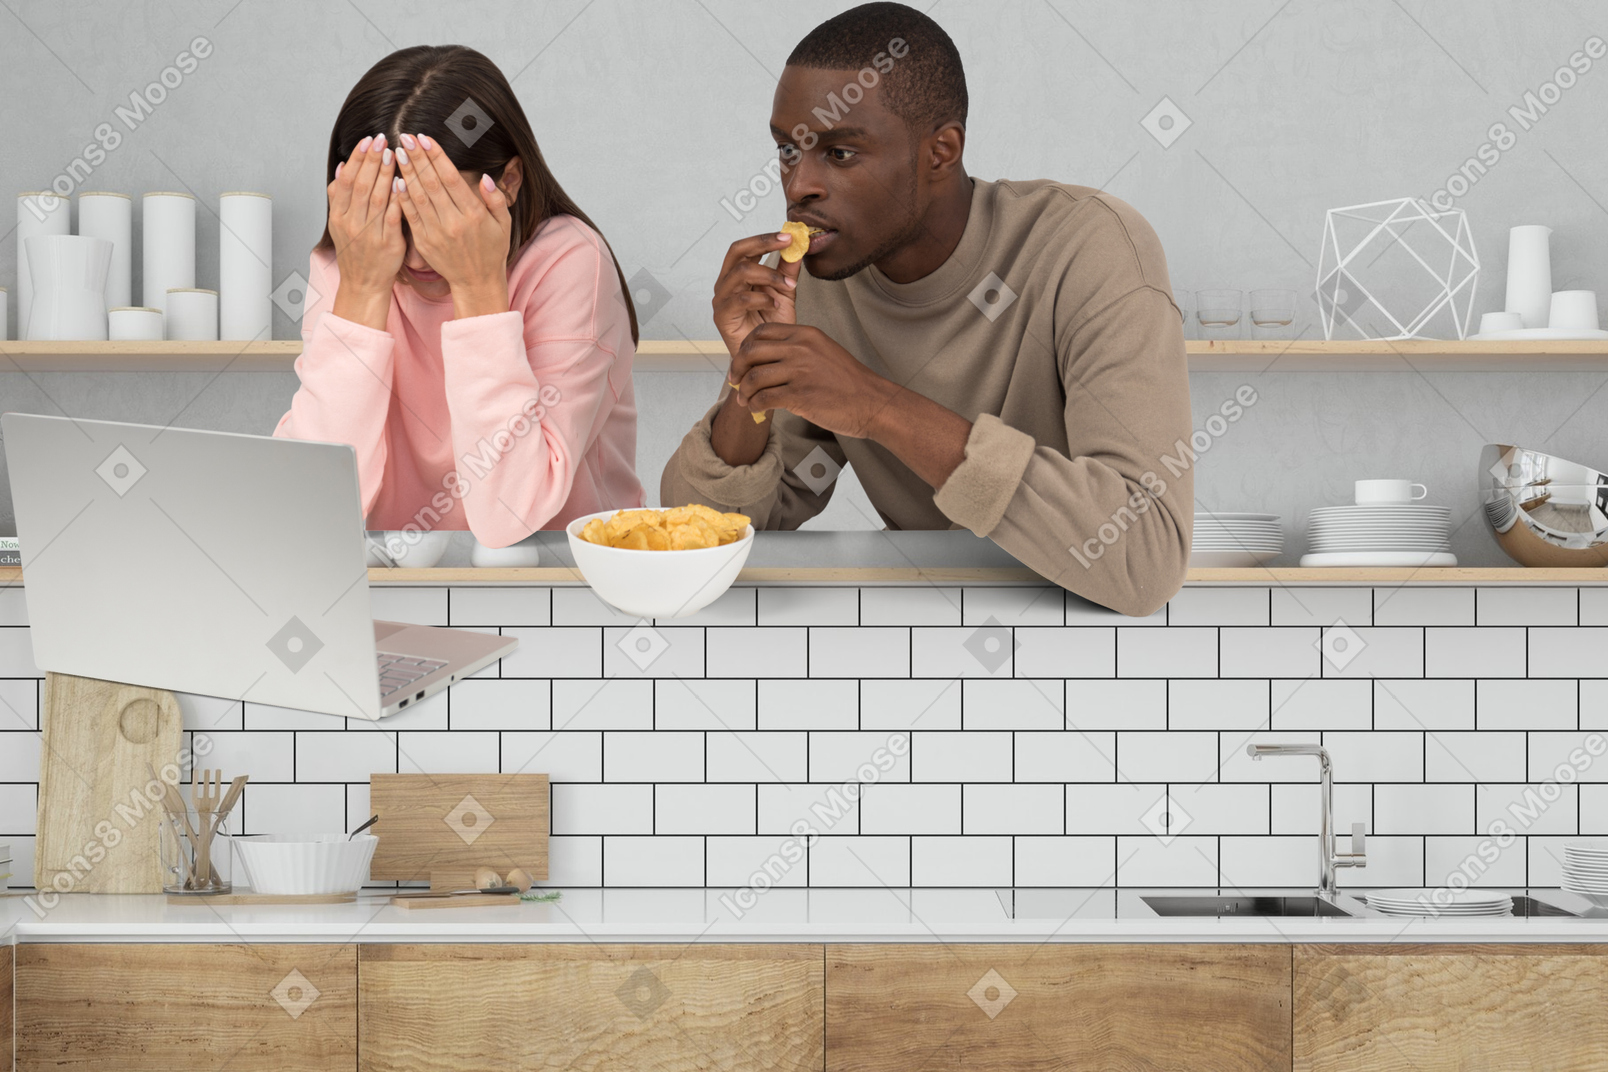 A man and a woman watching a movie at a kitchen counter